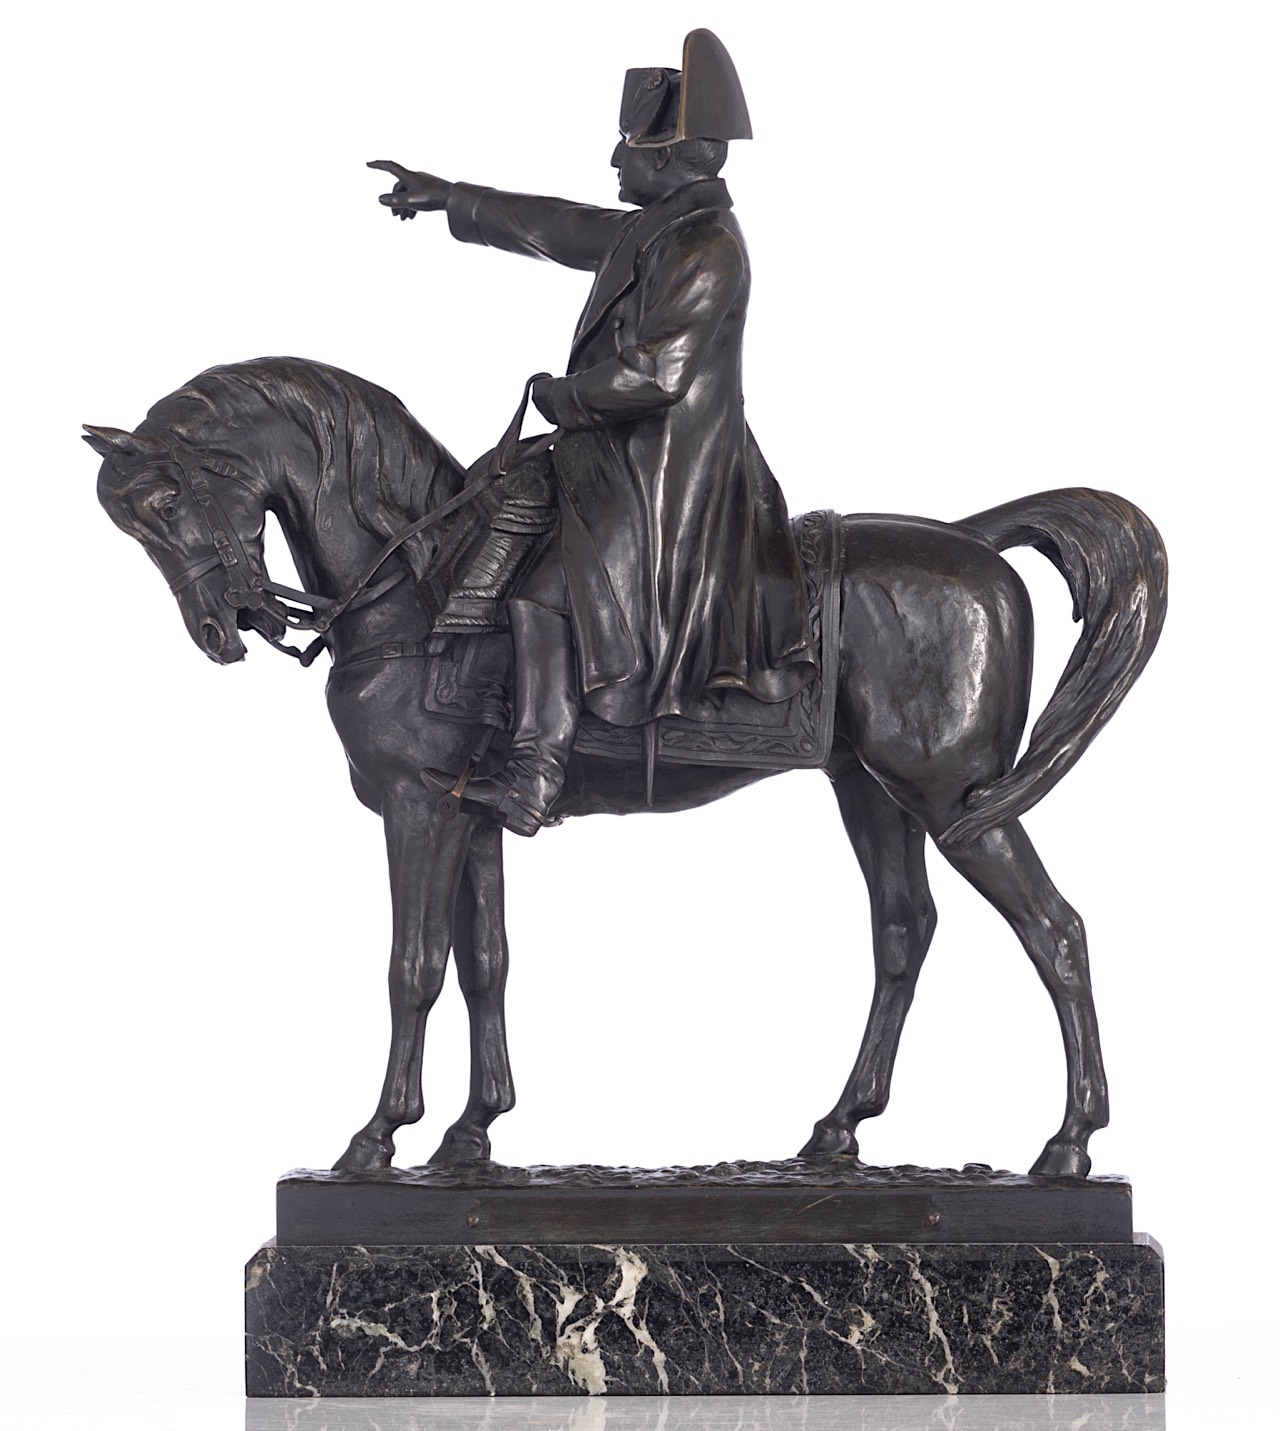 Ernest Charles Guilbert (1848-1913), Equestrian of Napoleon, 1910, patinated bronze, H 40 cm - Image 2 of 9